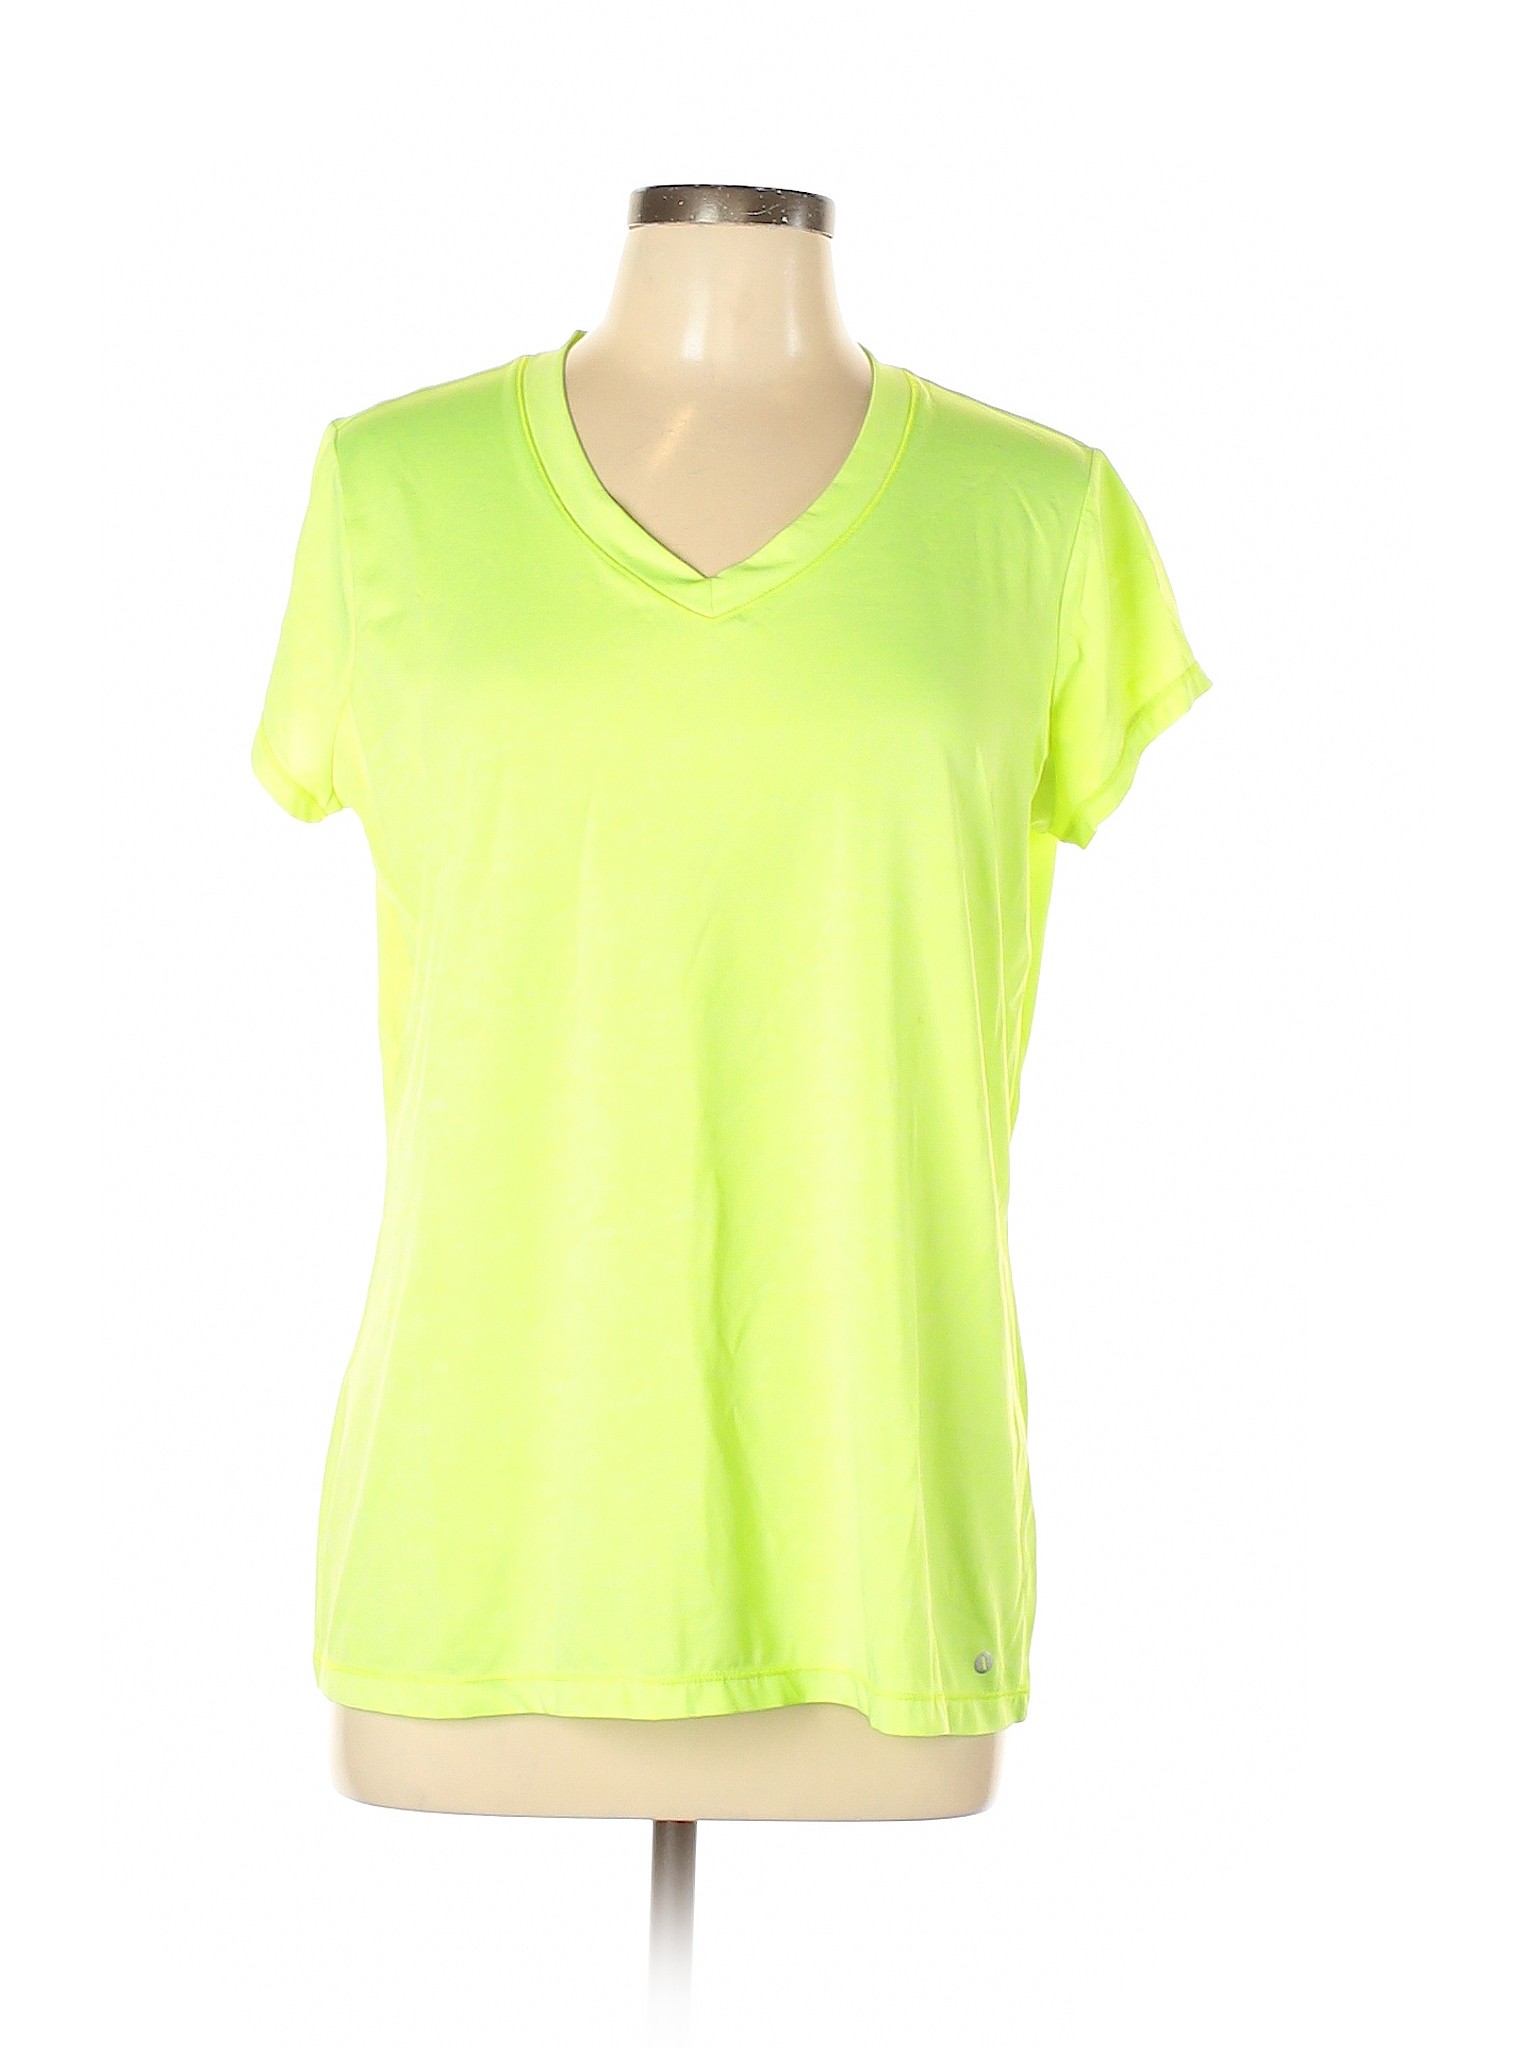 Xersion 100% Polyester Solid Green Active T-Shirt Size XL - 81% off ...